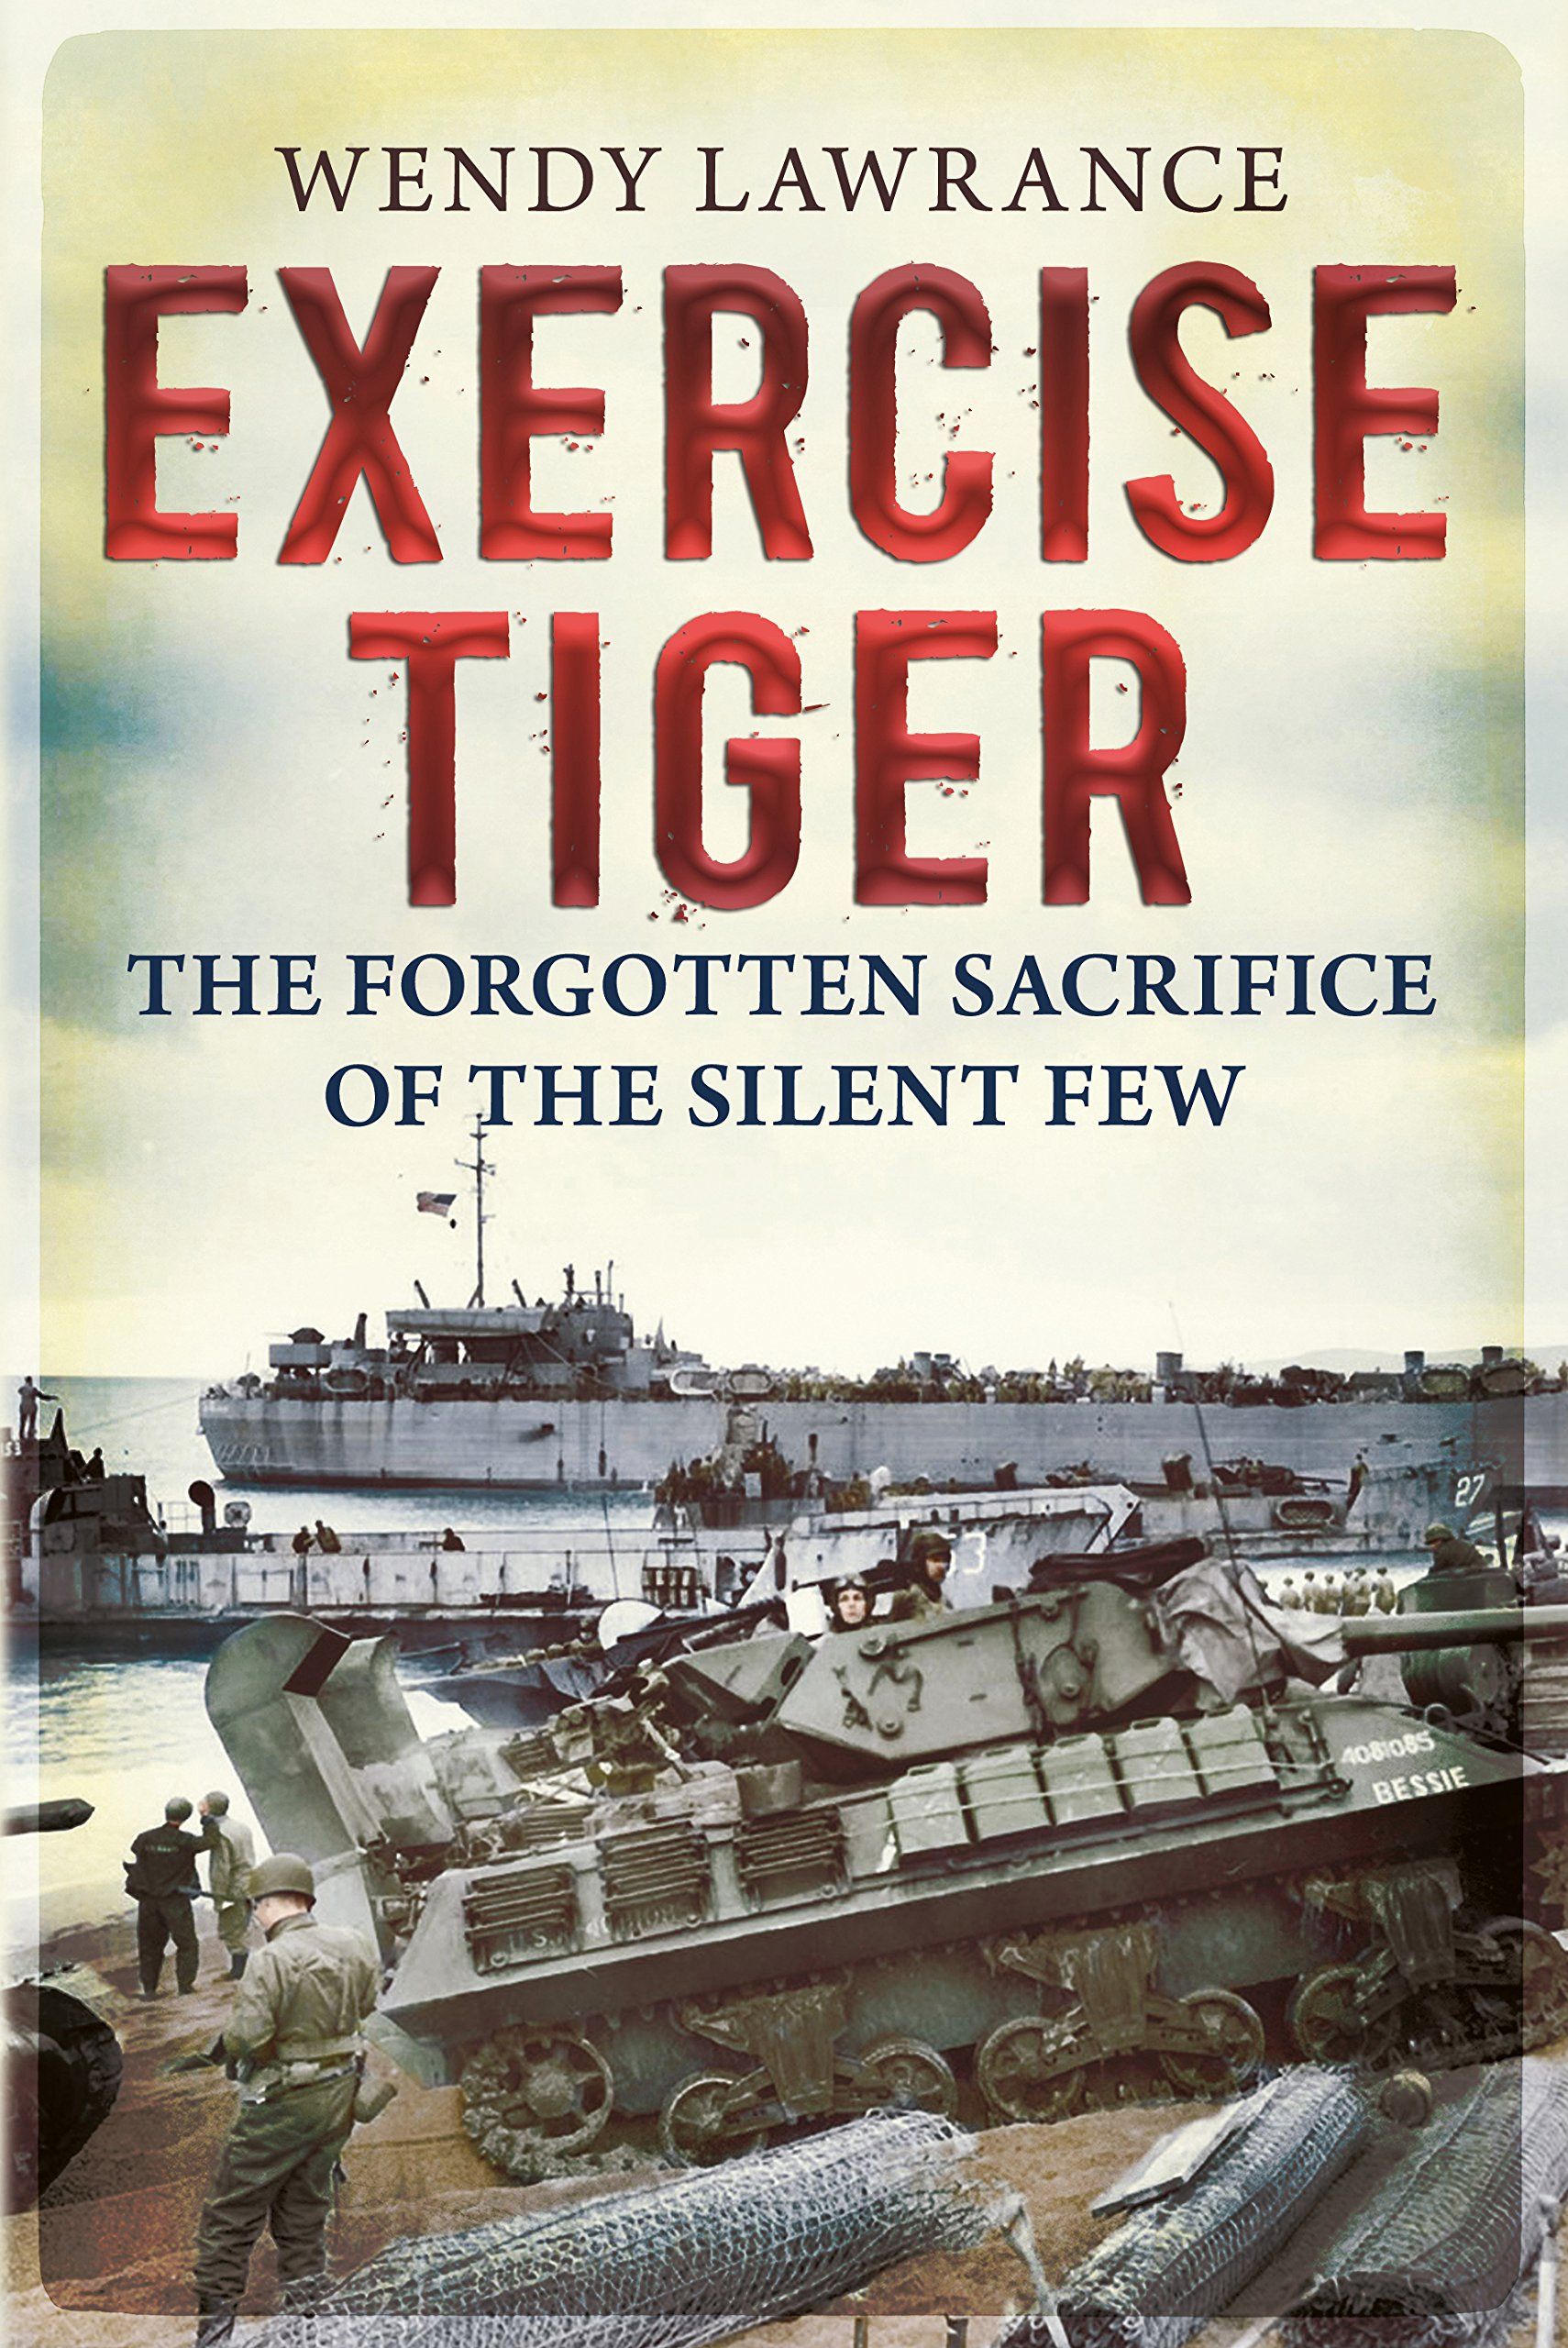 Image of the front cover of Exercise Tiger: The Forgotten Sacrifice of the Silent Few by Wendy Lawrance.